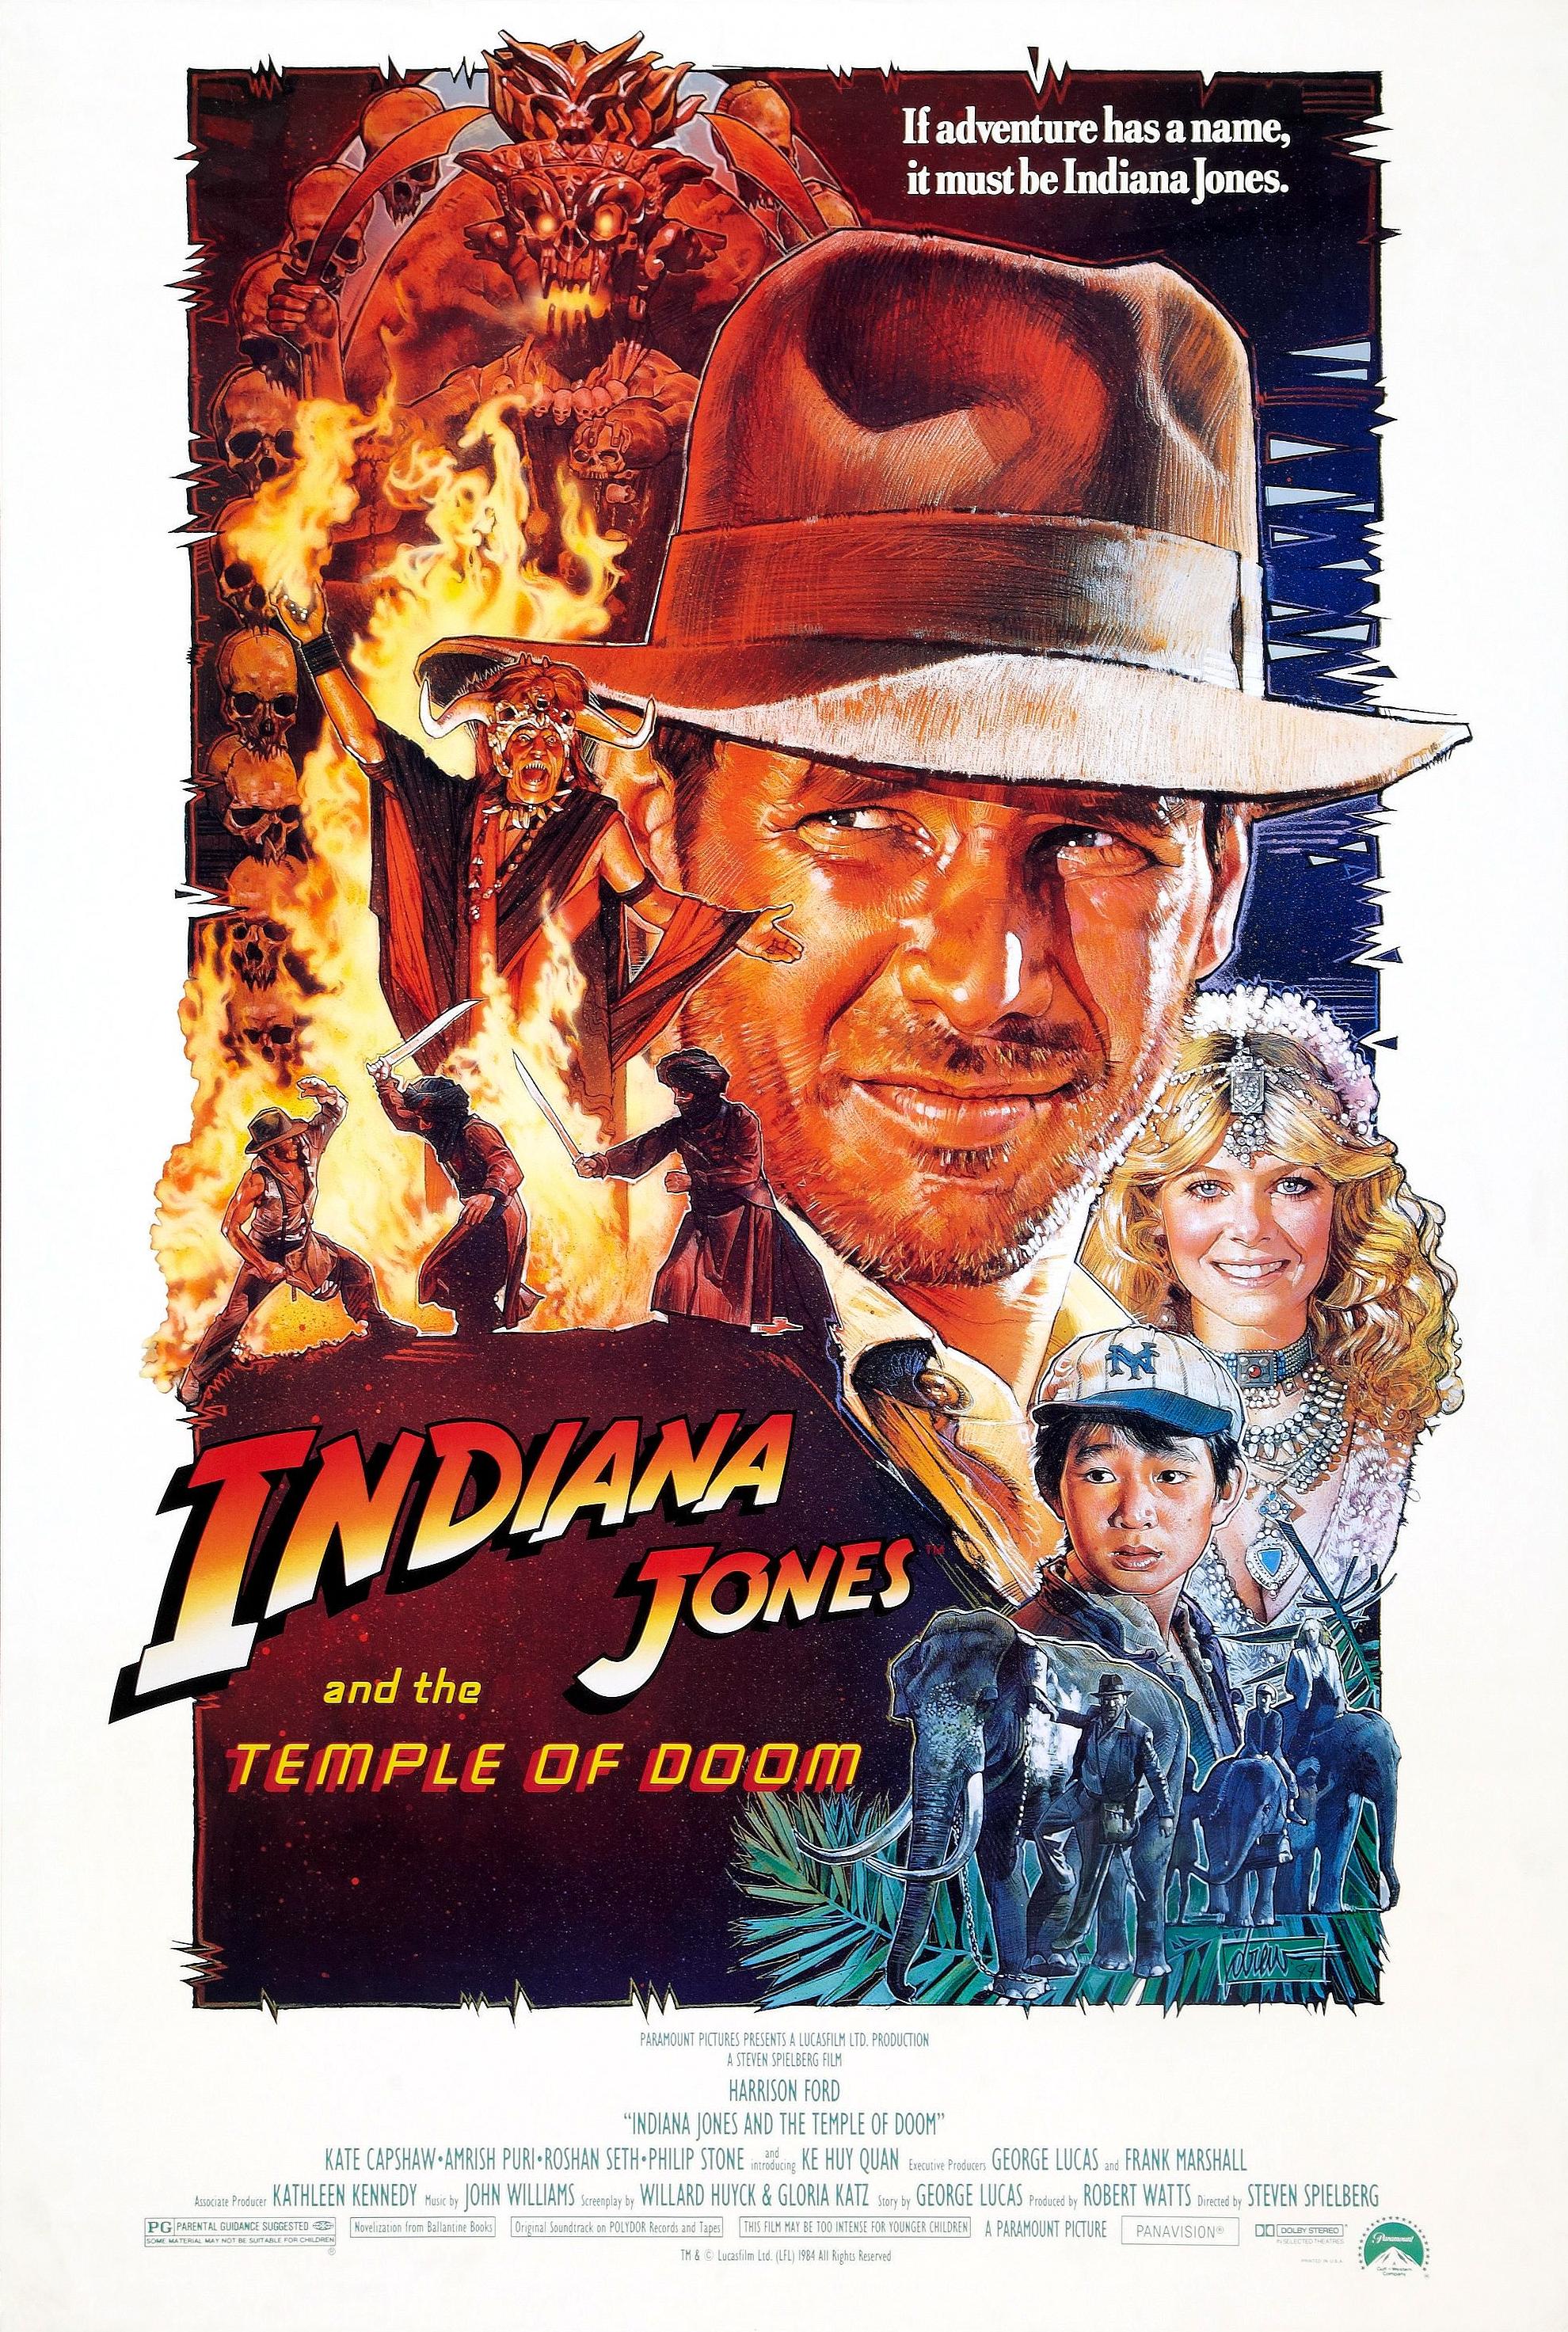 Indiana Jones and the Temple of Doom (a).jpg